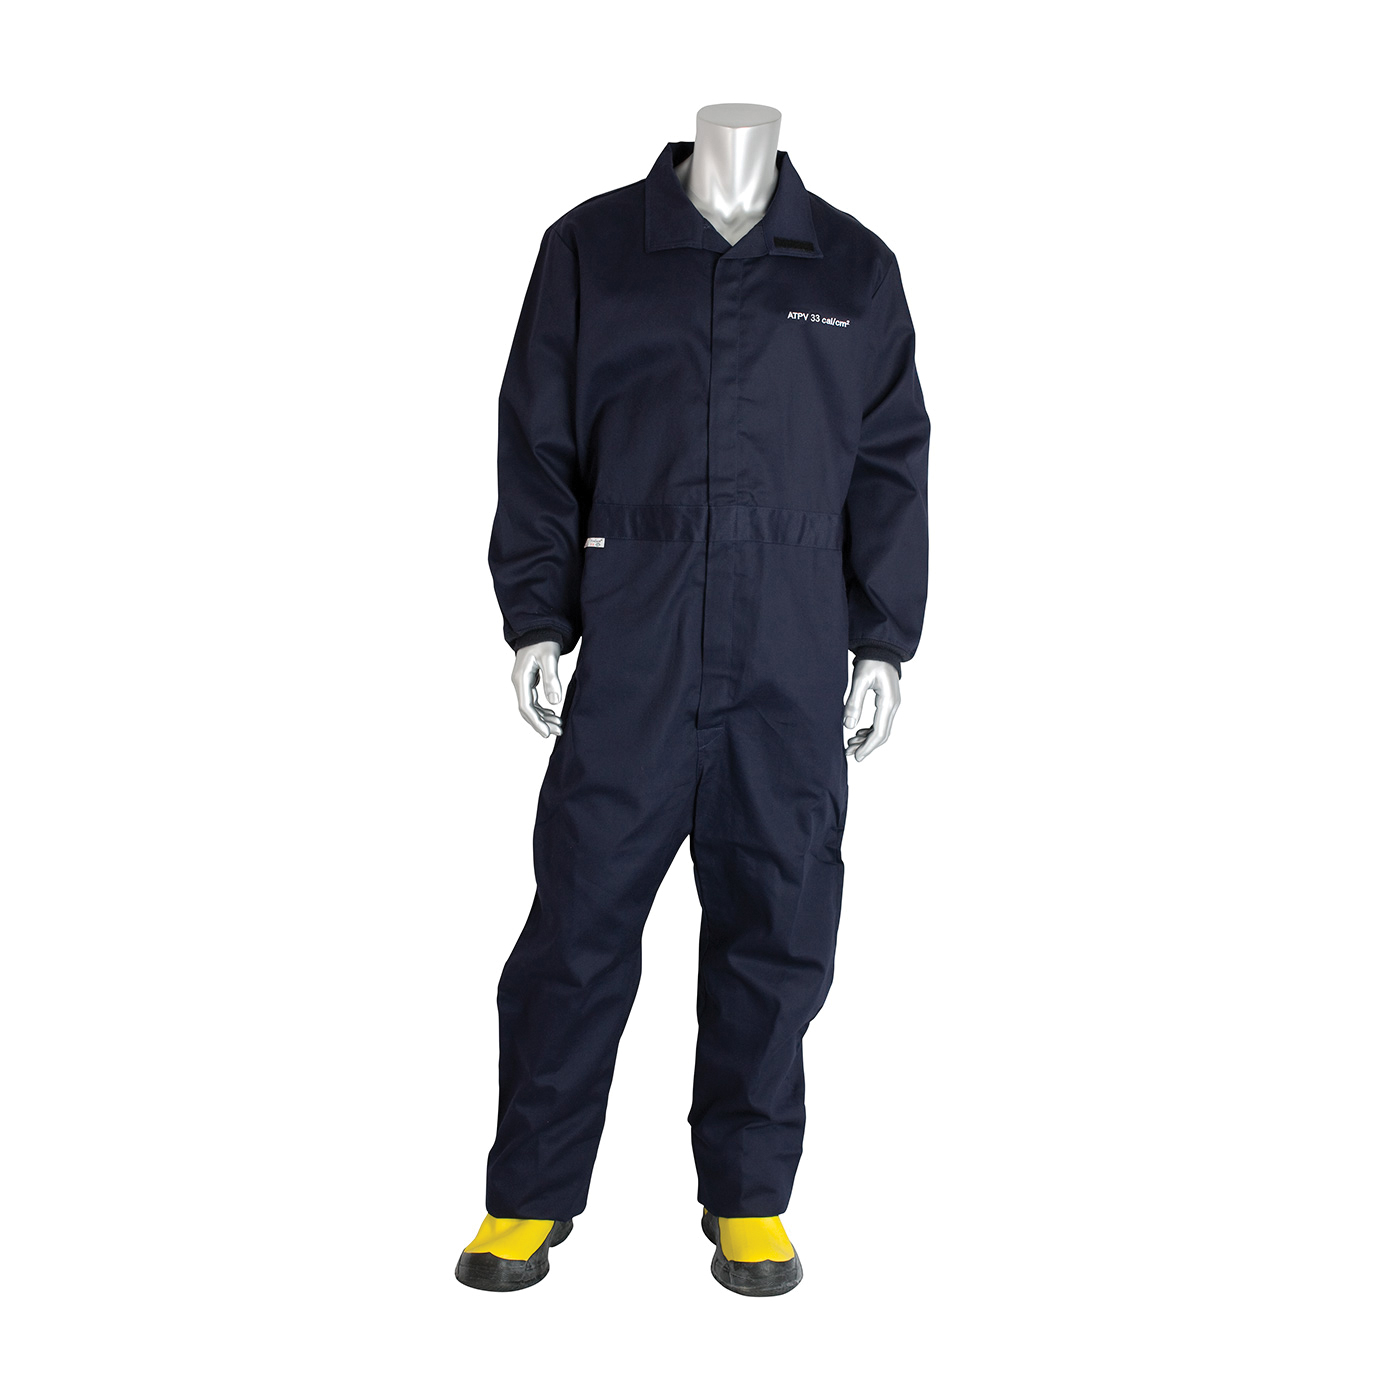 PIP® 9100-52758/3XL Flame Resistant Coverall, 3XL, Navy, 88% Cotton/12% Nylon, 56 to 58 in Chest, 32 in L Inseam